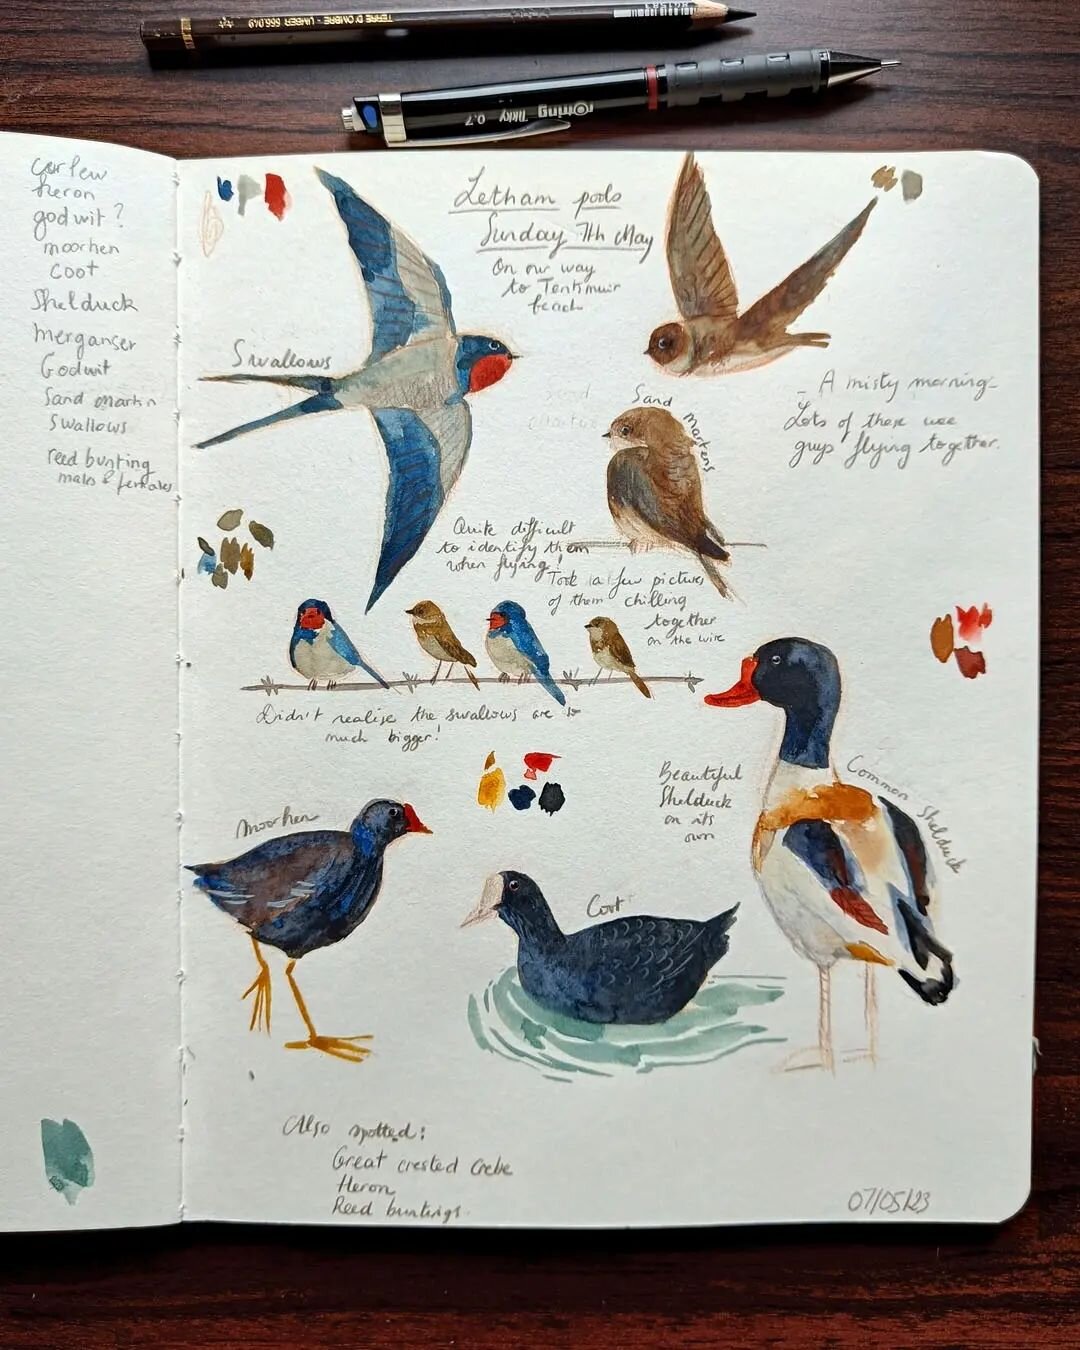 Nature journal page from a couple of weeks ago 🌱
 Misty and quiet Sunday morning, the place was quite busy with some lovely feathery friends. My favorite sight was definitely the bunch of swallows and Sand Martens chilling together on the barbwire :